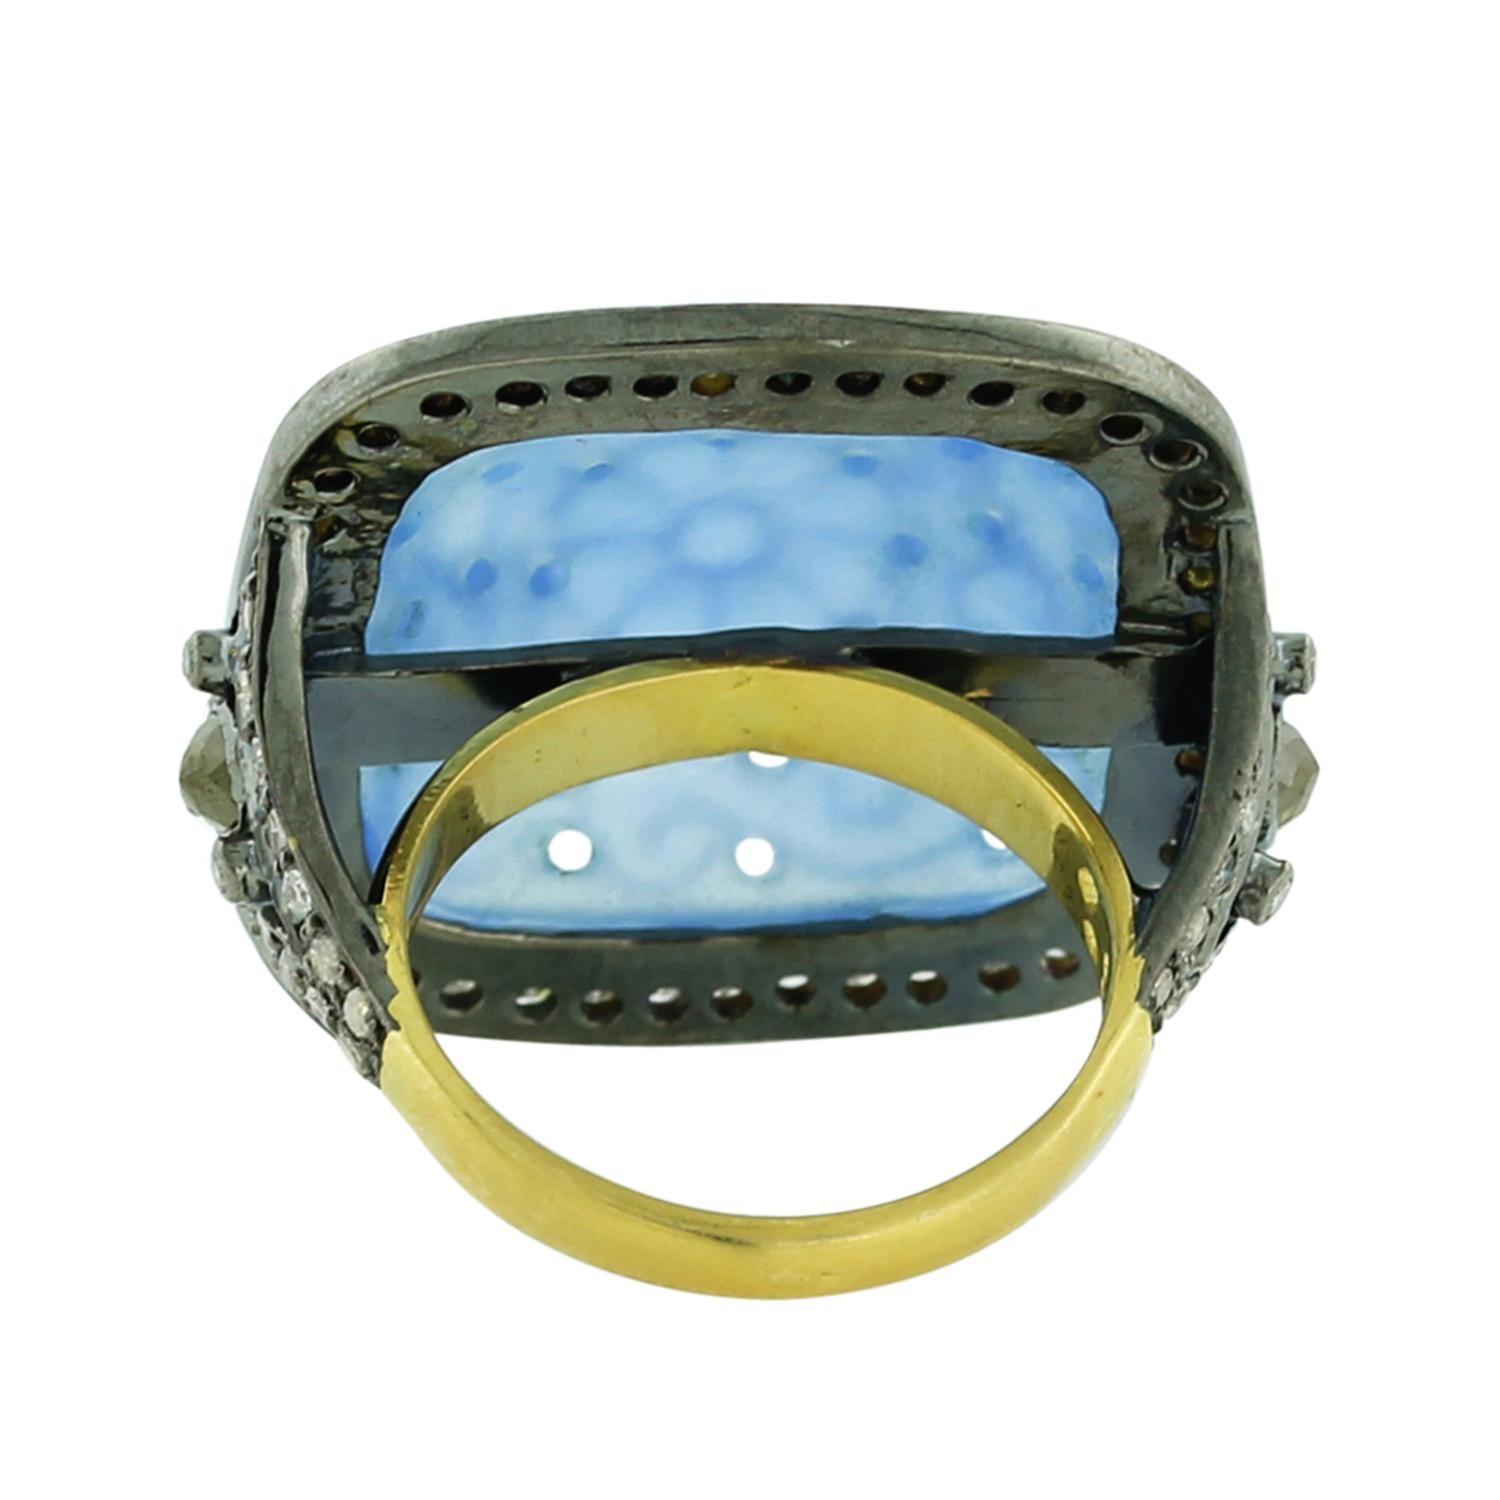 Art Nouveau 10.1 ct Blue Agate Cocktail Ring With Pave Diamonds Made In 18k Gold & Silver For Sale